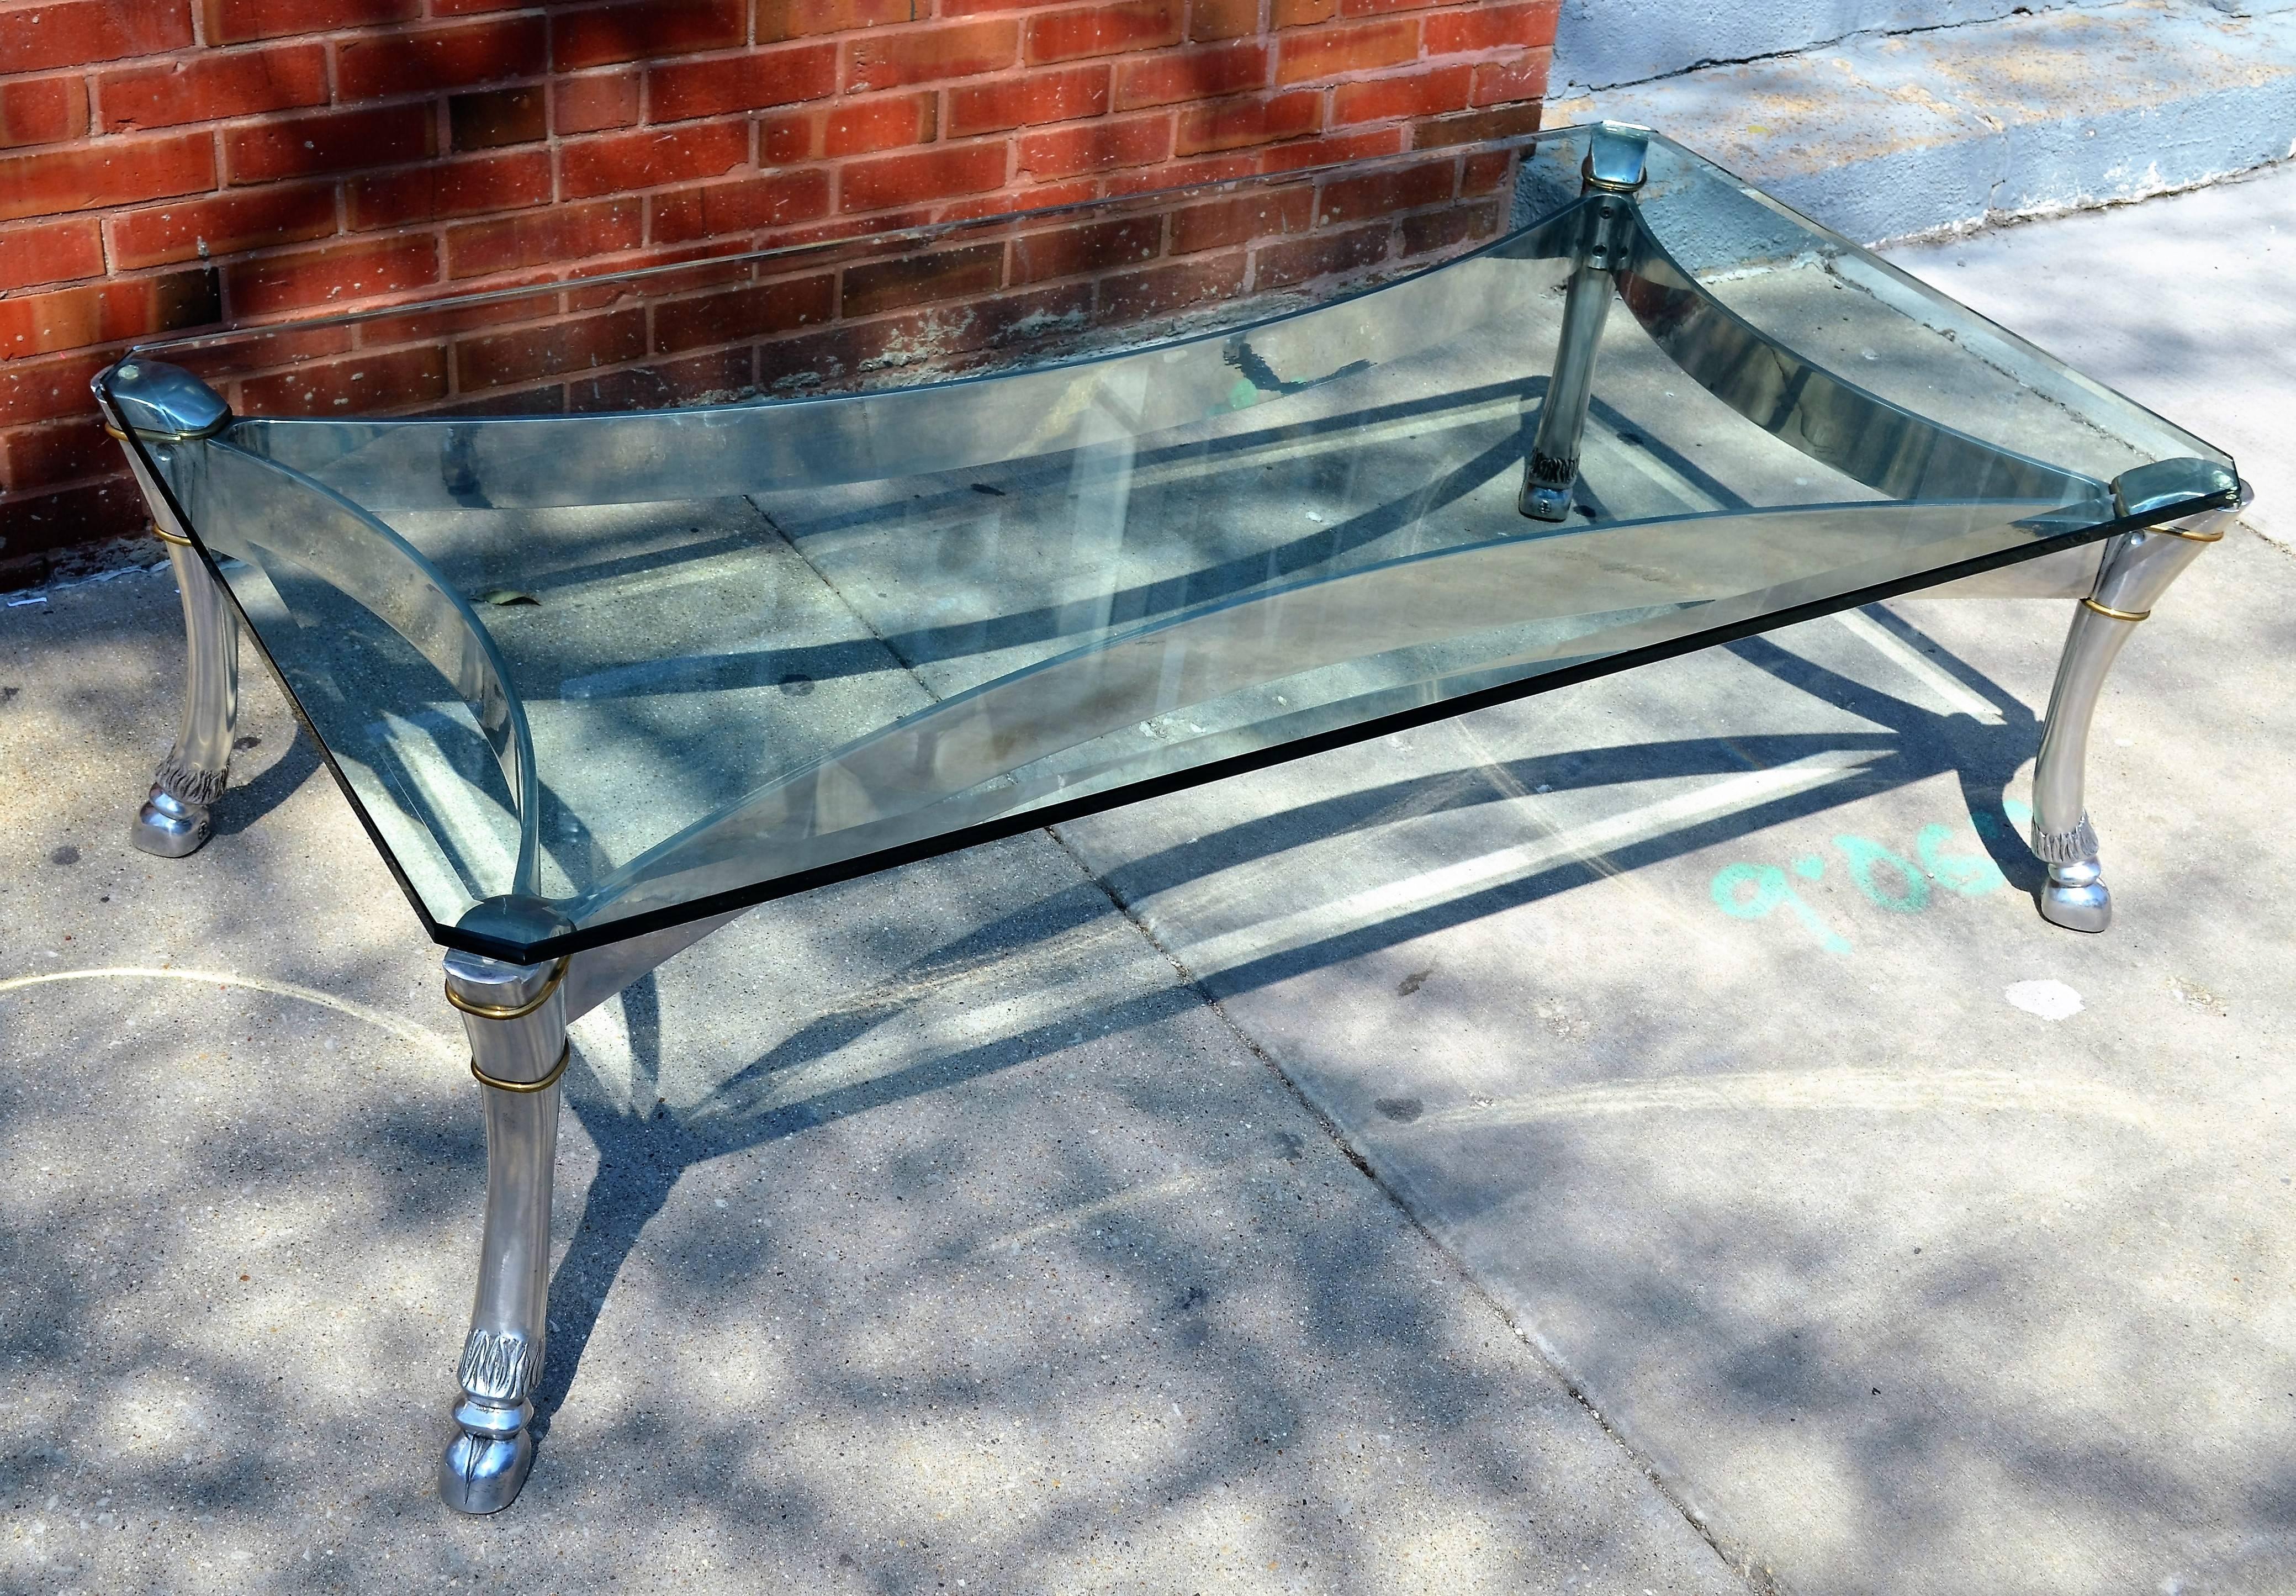 An exceptionally well crafted  large-scale steel and glass coffee table.
Elegant metal table with large scale hoofed  legs.
The beveled glass top is original and is quite thick.
The coffee table is in the manner of Arthur Court.